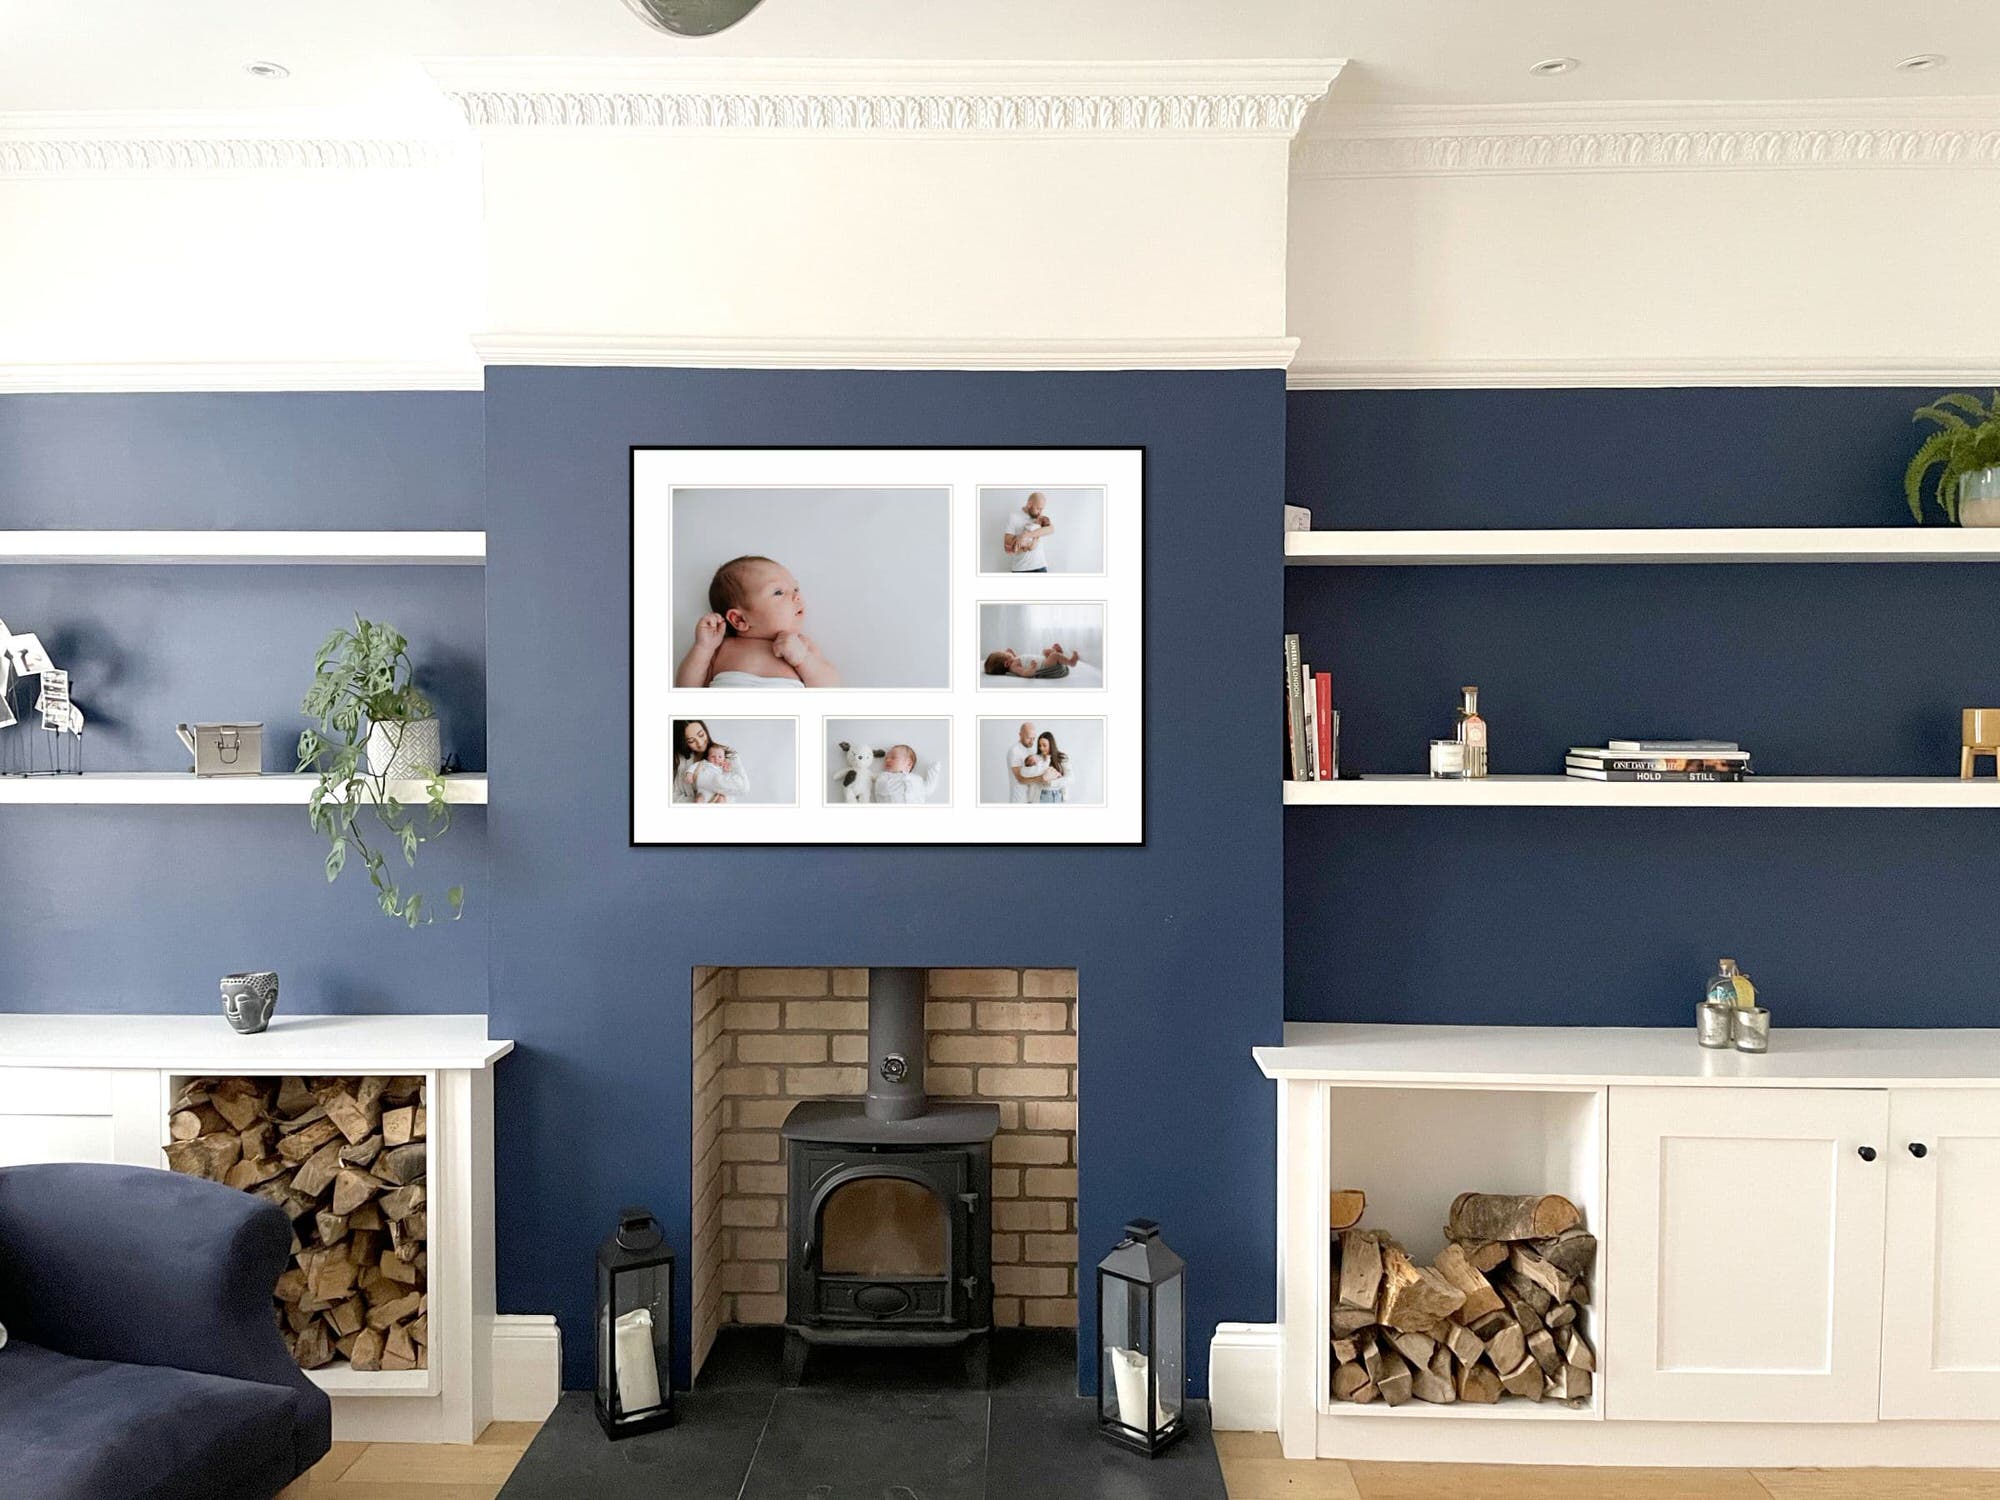 image of a fireplace with a multi aperture frame on the chimney breast of images taken at a kent newborn photoshoot in bexley